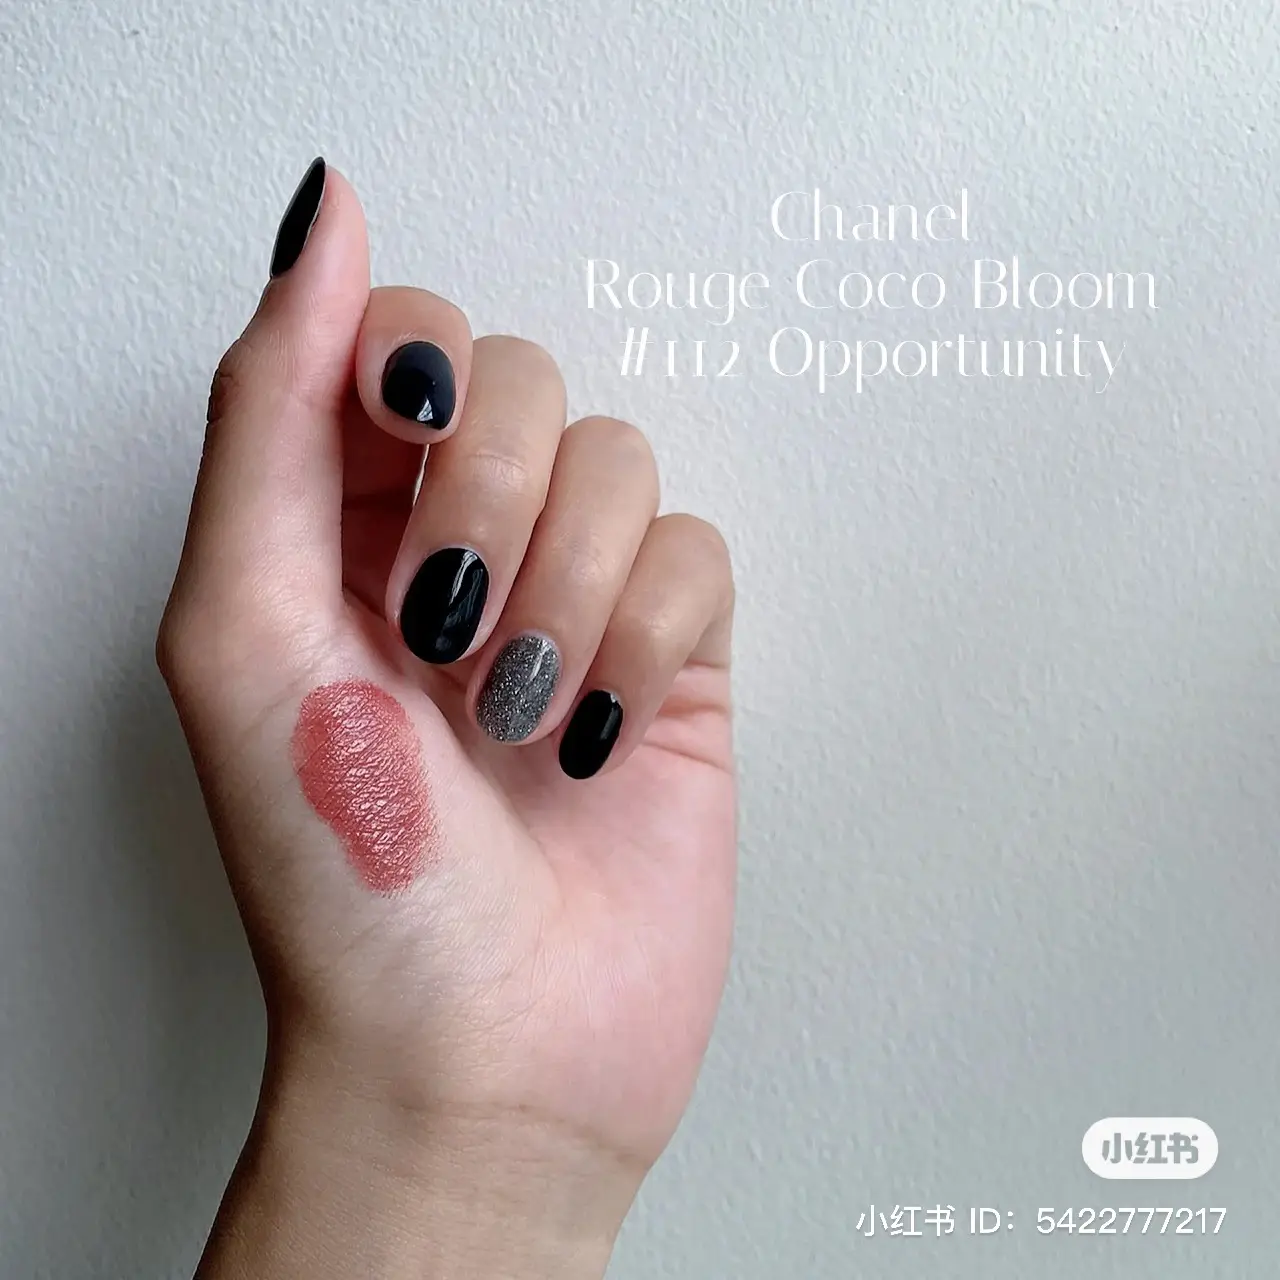 New Chanel Rouge Coco Lipstick Swatches & Review: Louise, Adrienne, Julia –  the beauty endeavor